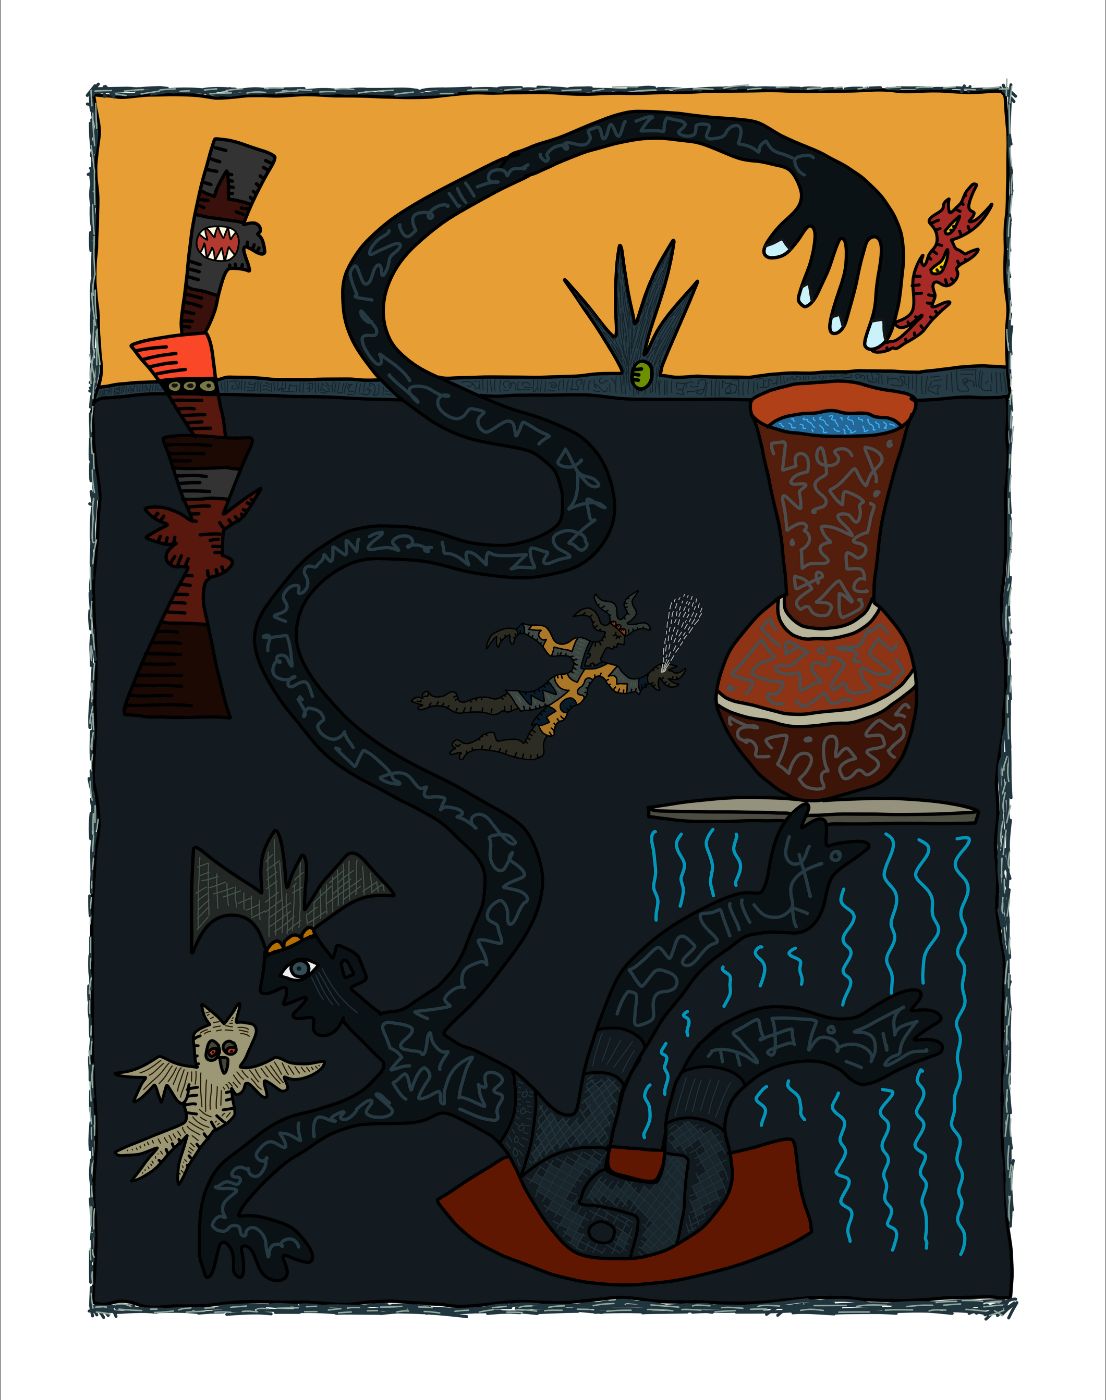 reaching-out-never-felt-so-good Gregg Price Collectible Prints JULIE MILLER AFRICAN CONTEMPORARY